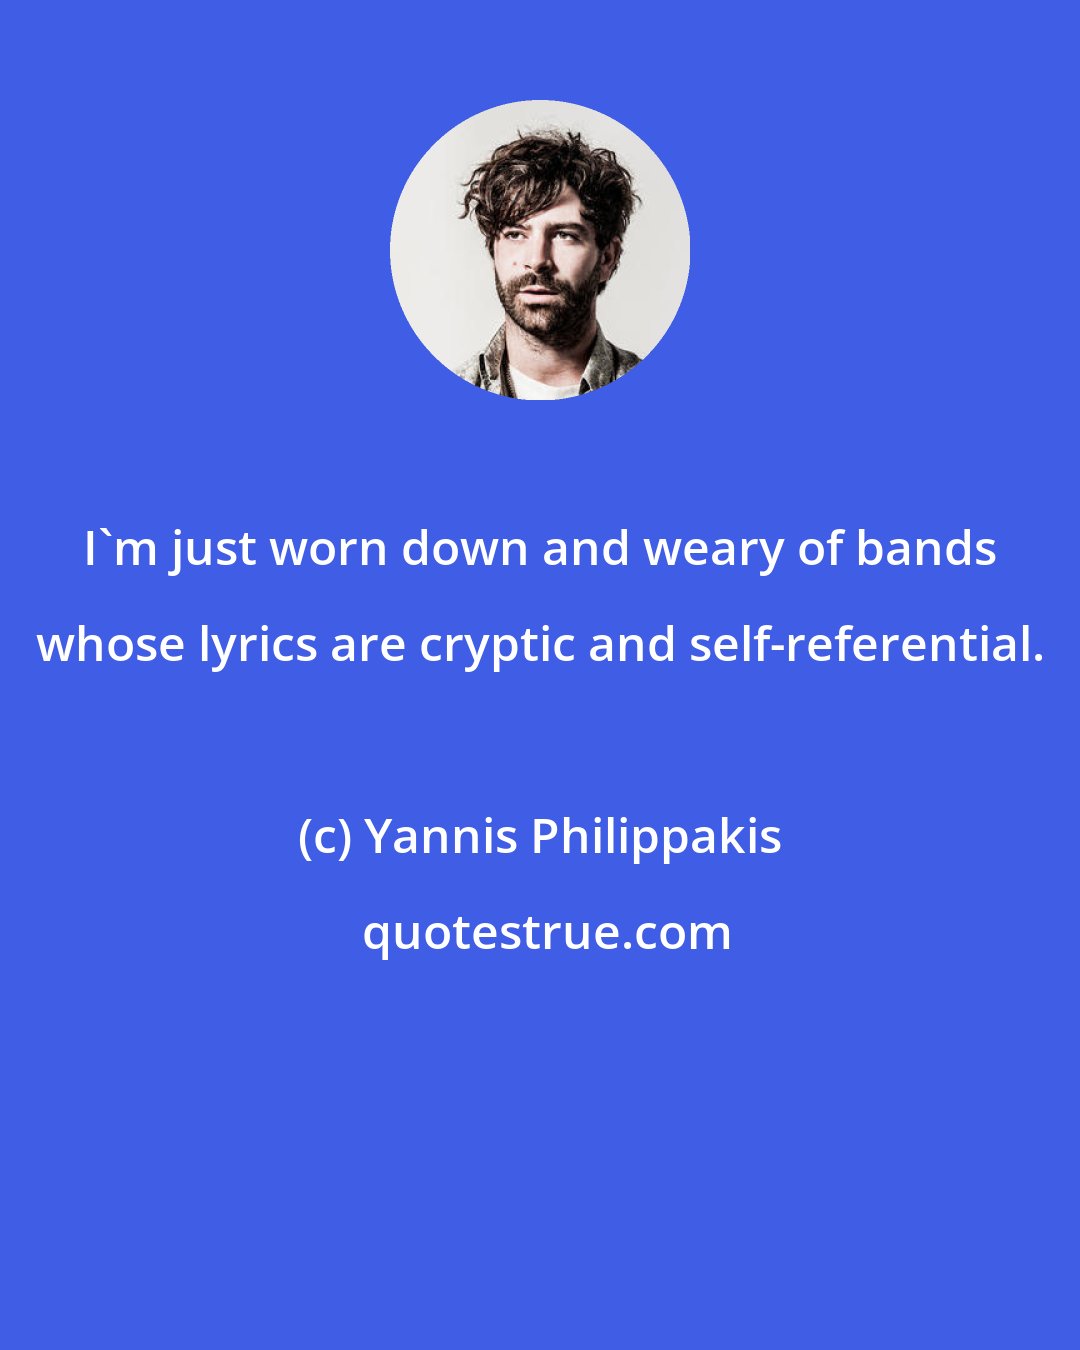 Yannis Philippakis: I'm just worn down and weary of bands whose lyrics are cryptic and self-referential.